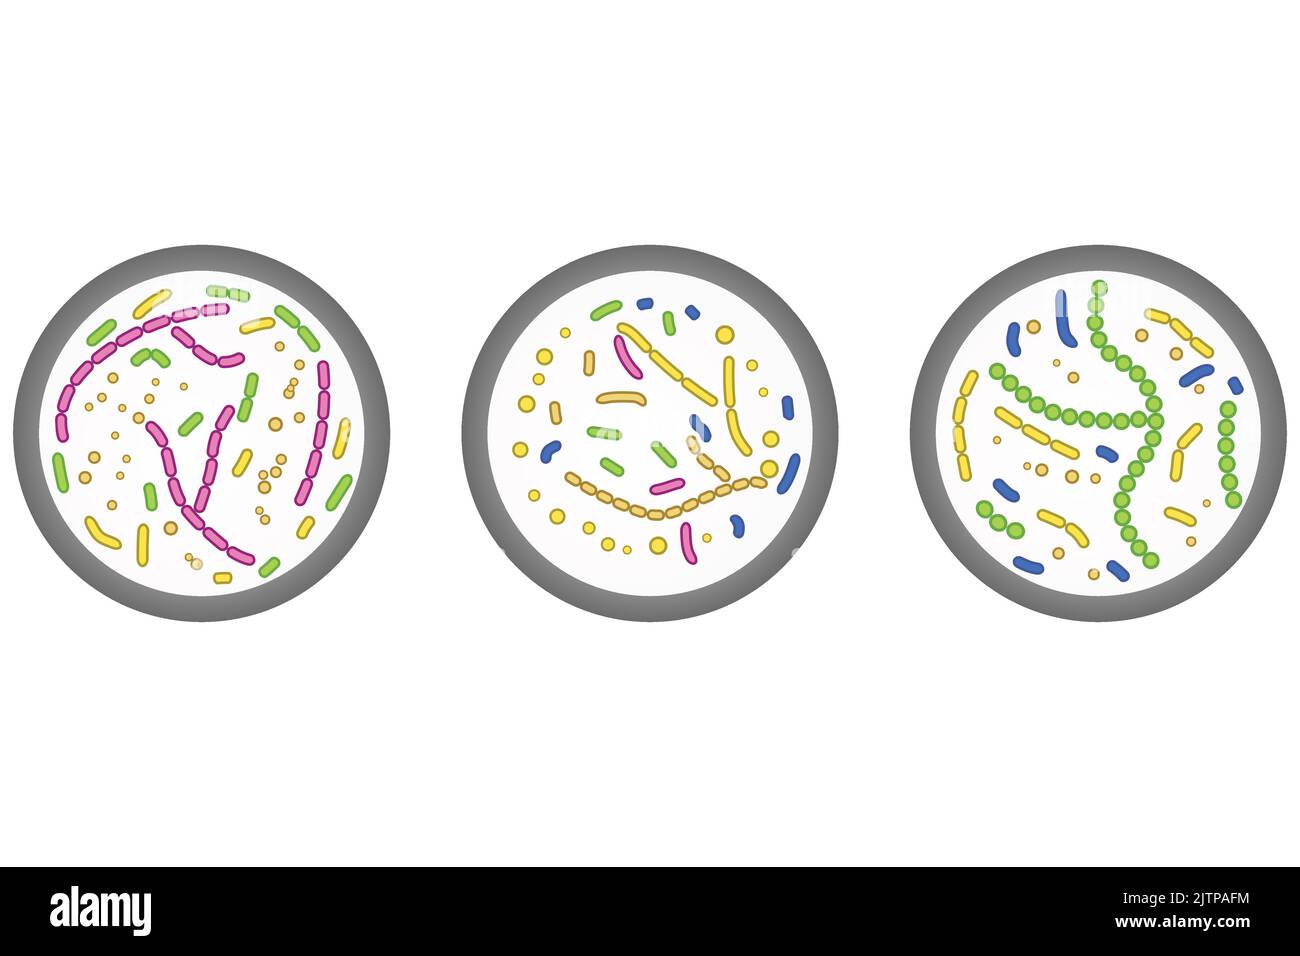 Set of 3 petri dish icons. Colorful simple illustration with bacterial cells. Stock Vector